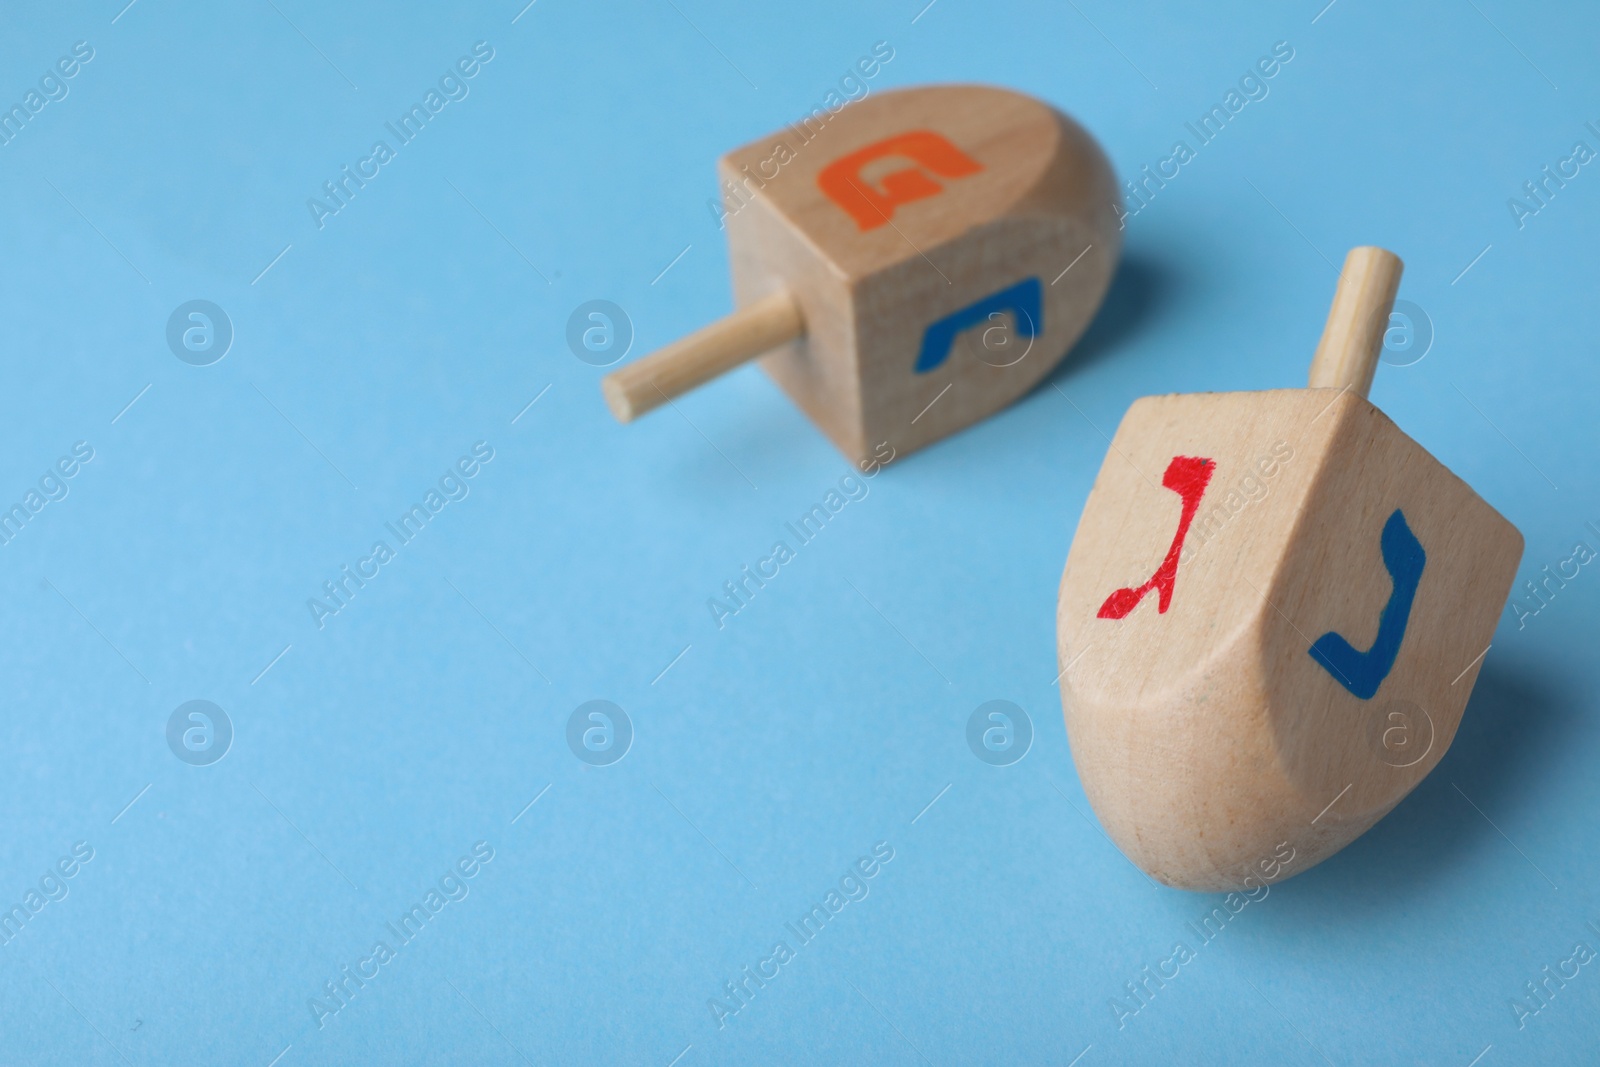 Photo of Hanukkah traditional dreidels with letters Gimel, Nun and Pe on light blue background, space for text